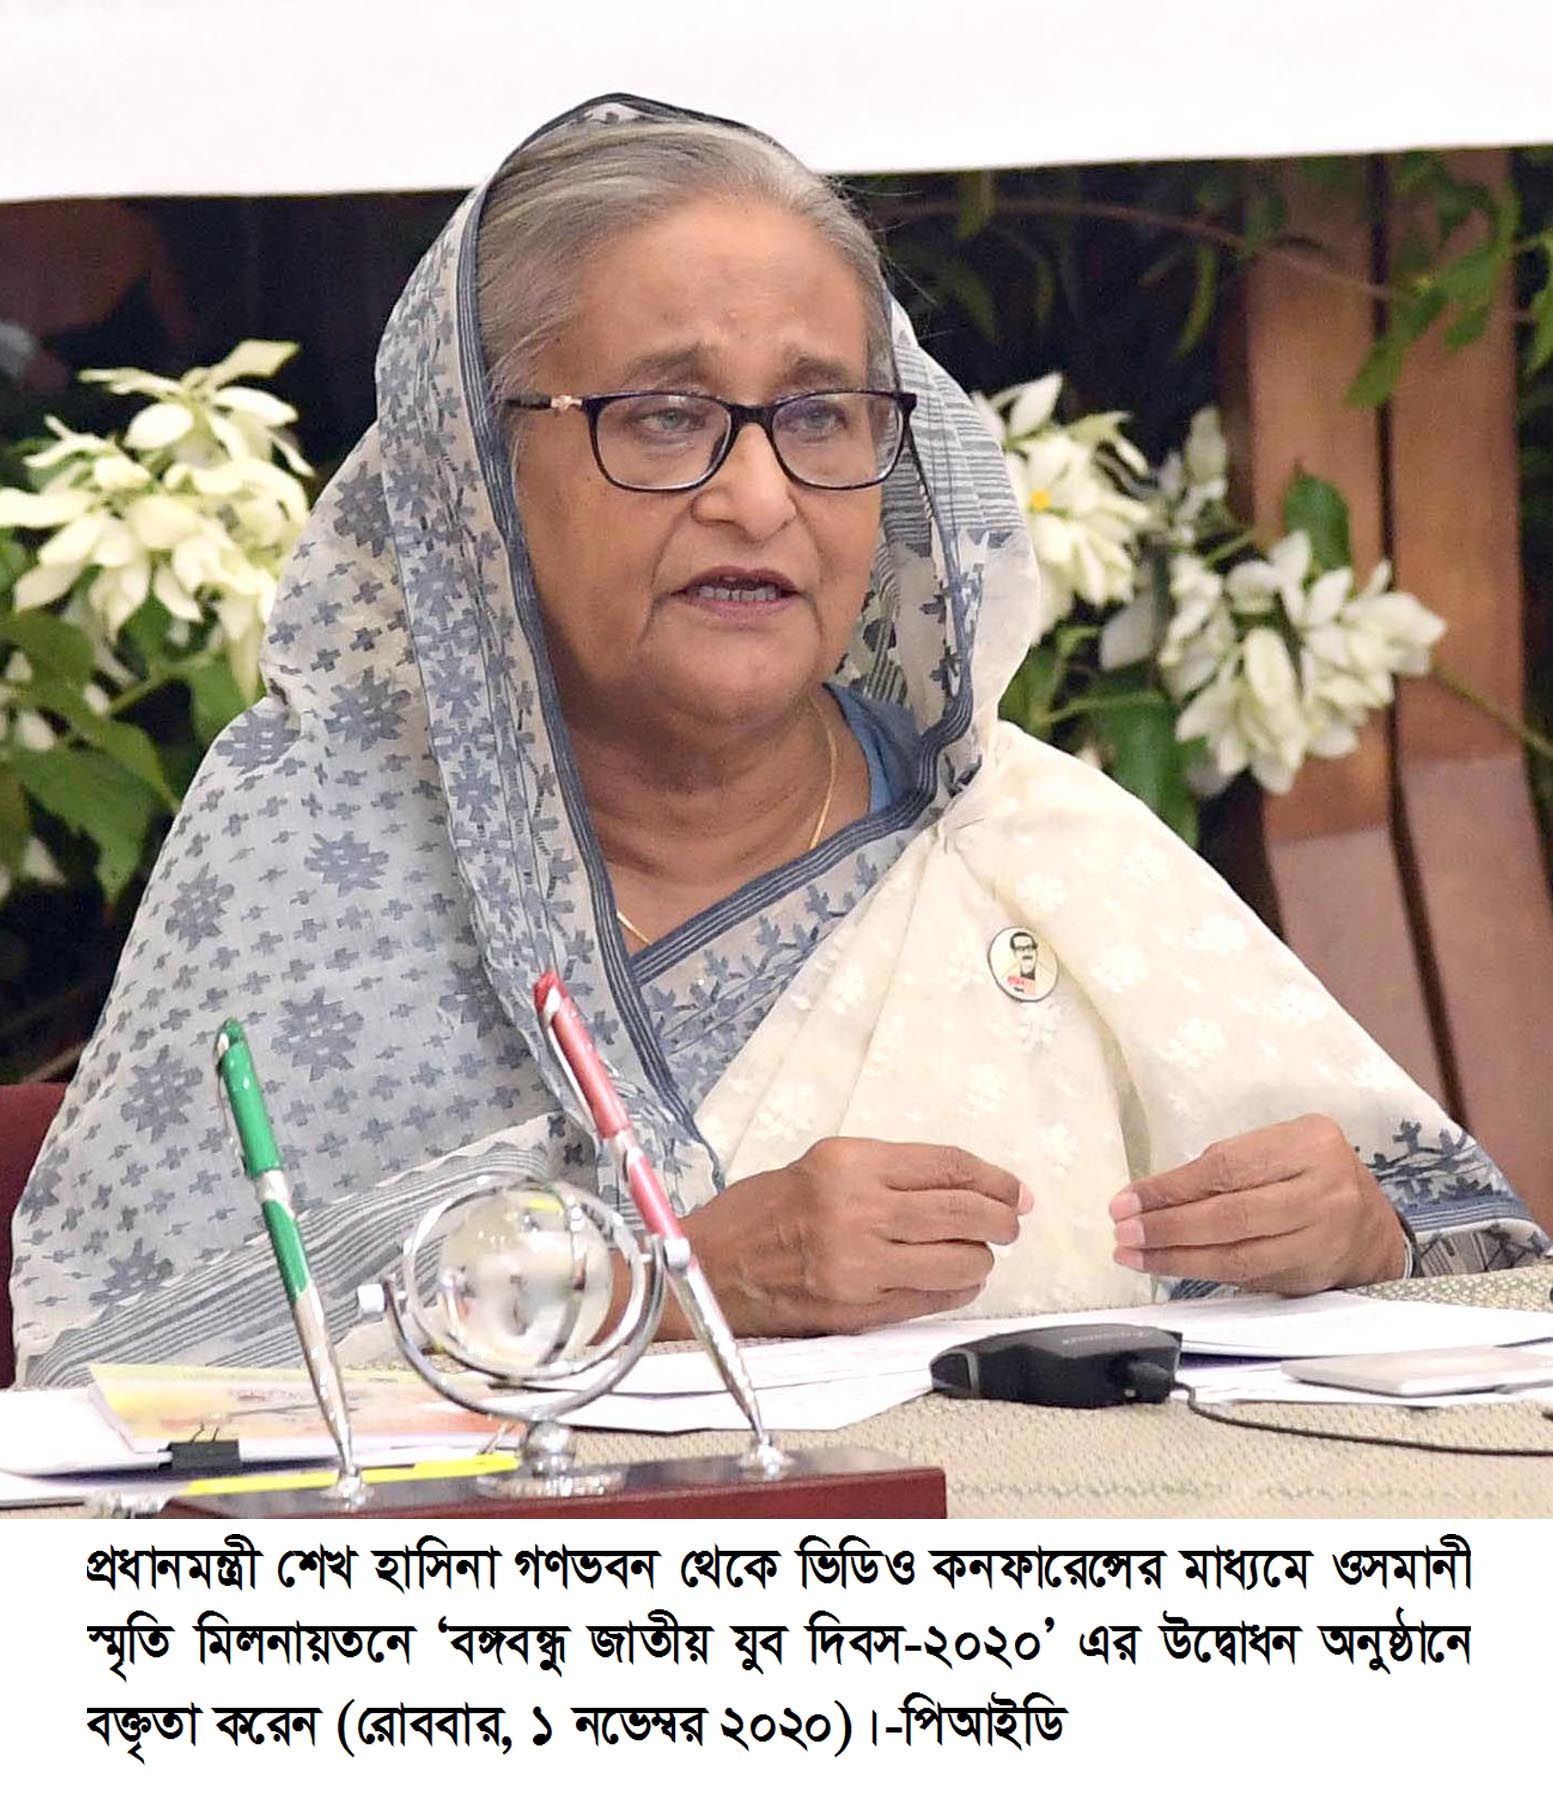 Sheikh Hasina attends special event